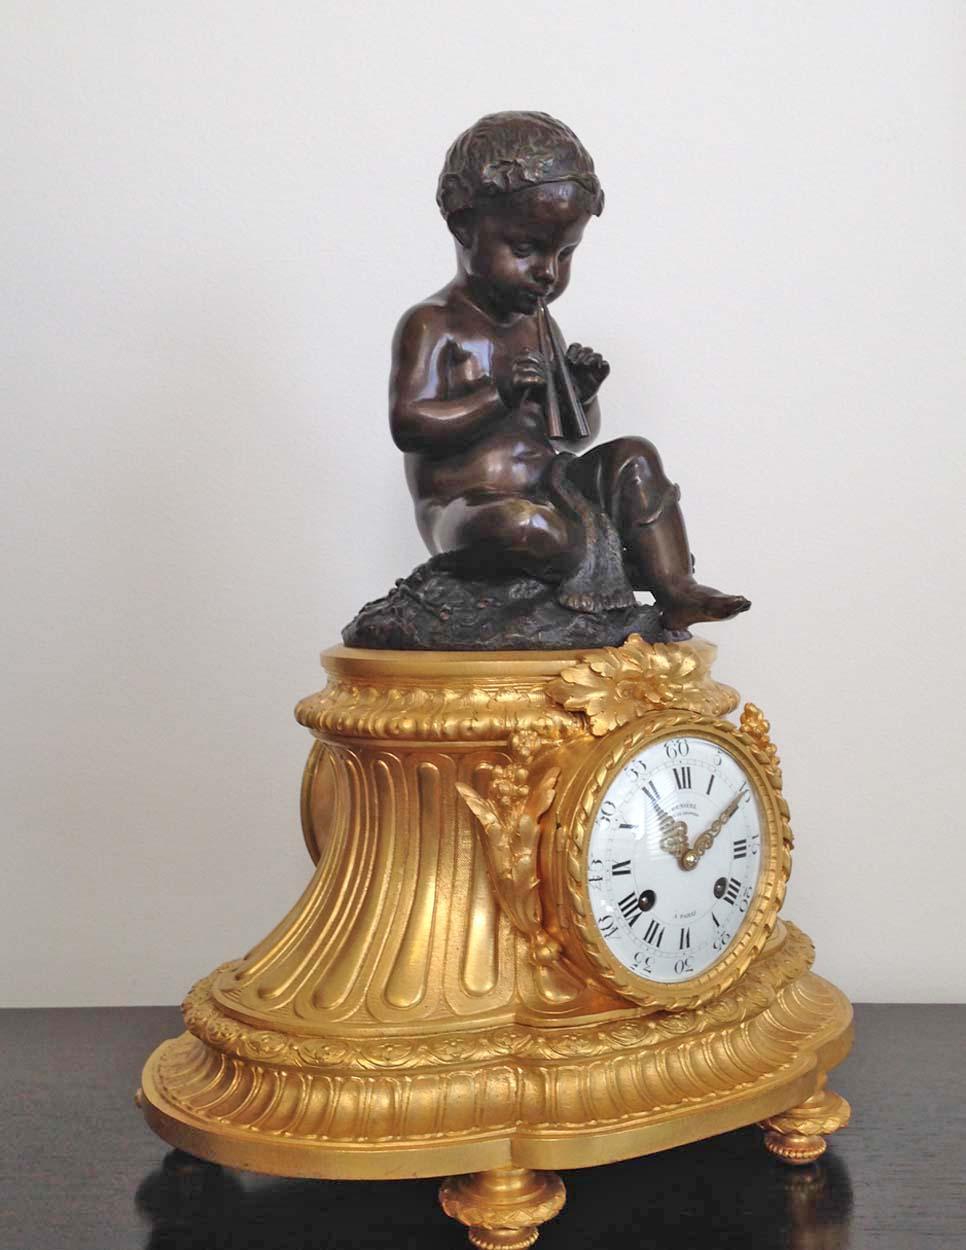 A fine French 19th century Louis XVI style ormolu and patinated bronze clock signed by renowned Paris clock maker Denière. 

Surmounted by the patinated bronze figure of a partly draped child wearing a wreath of leaves and playing an aulos (Greek